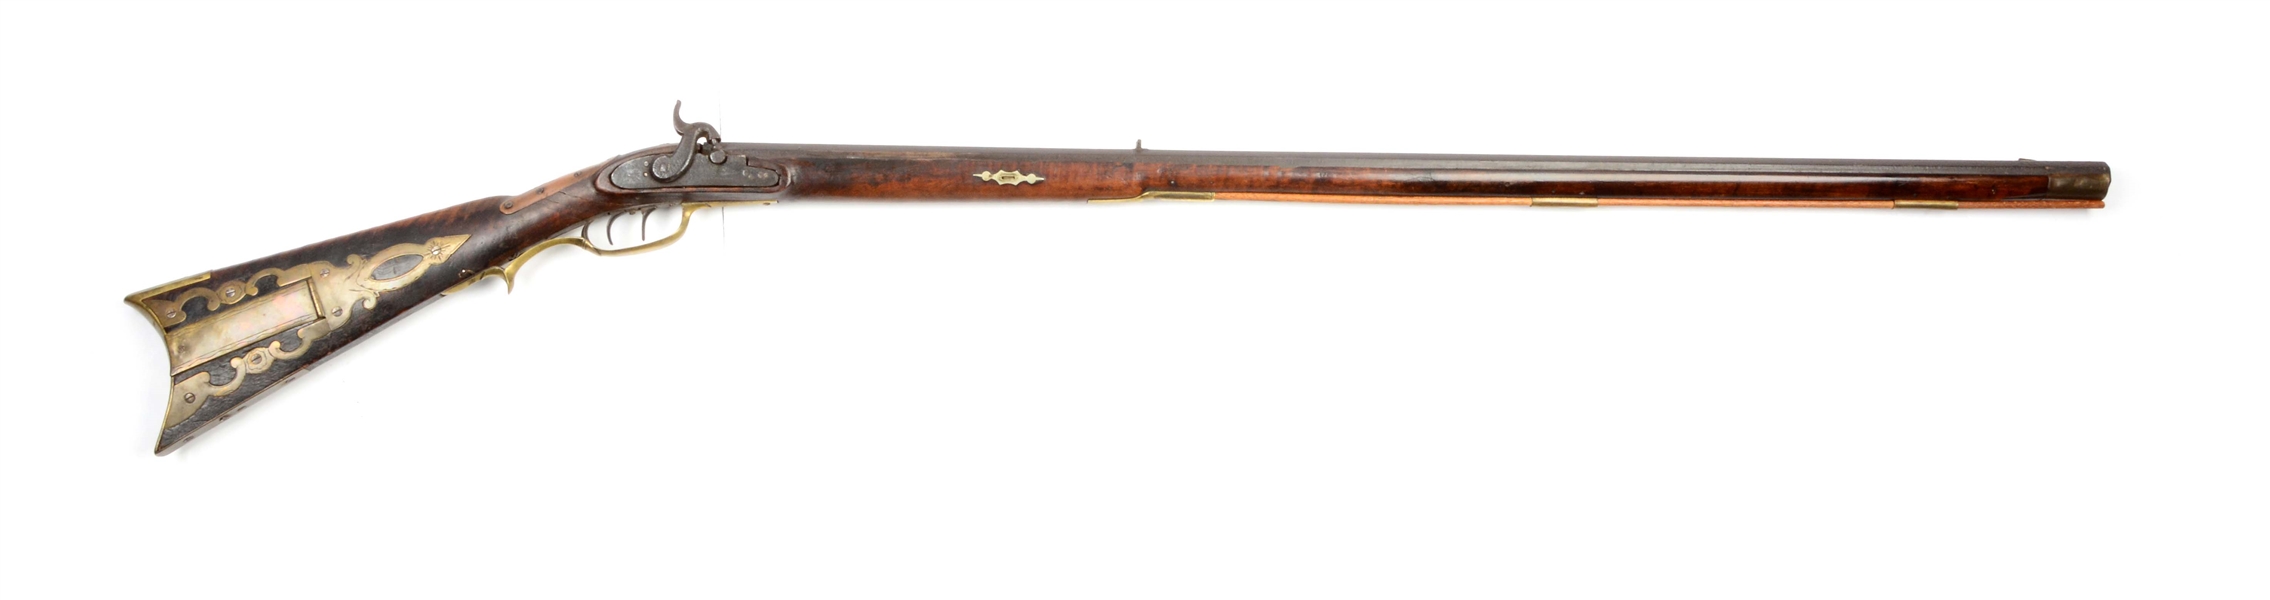 (A) FULL-STOCK PERCUSSION KENTUCKY RIFLE SIGNED W. HAWKEN.